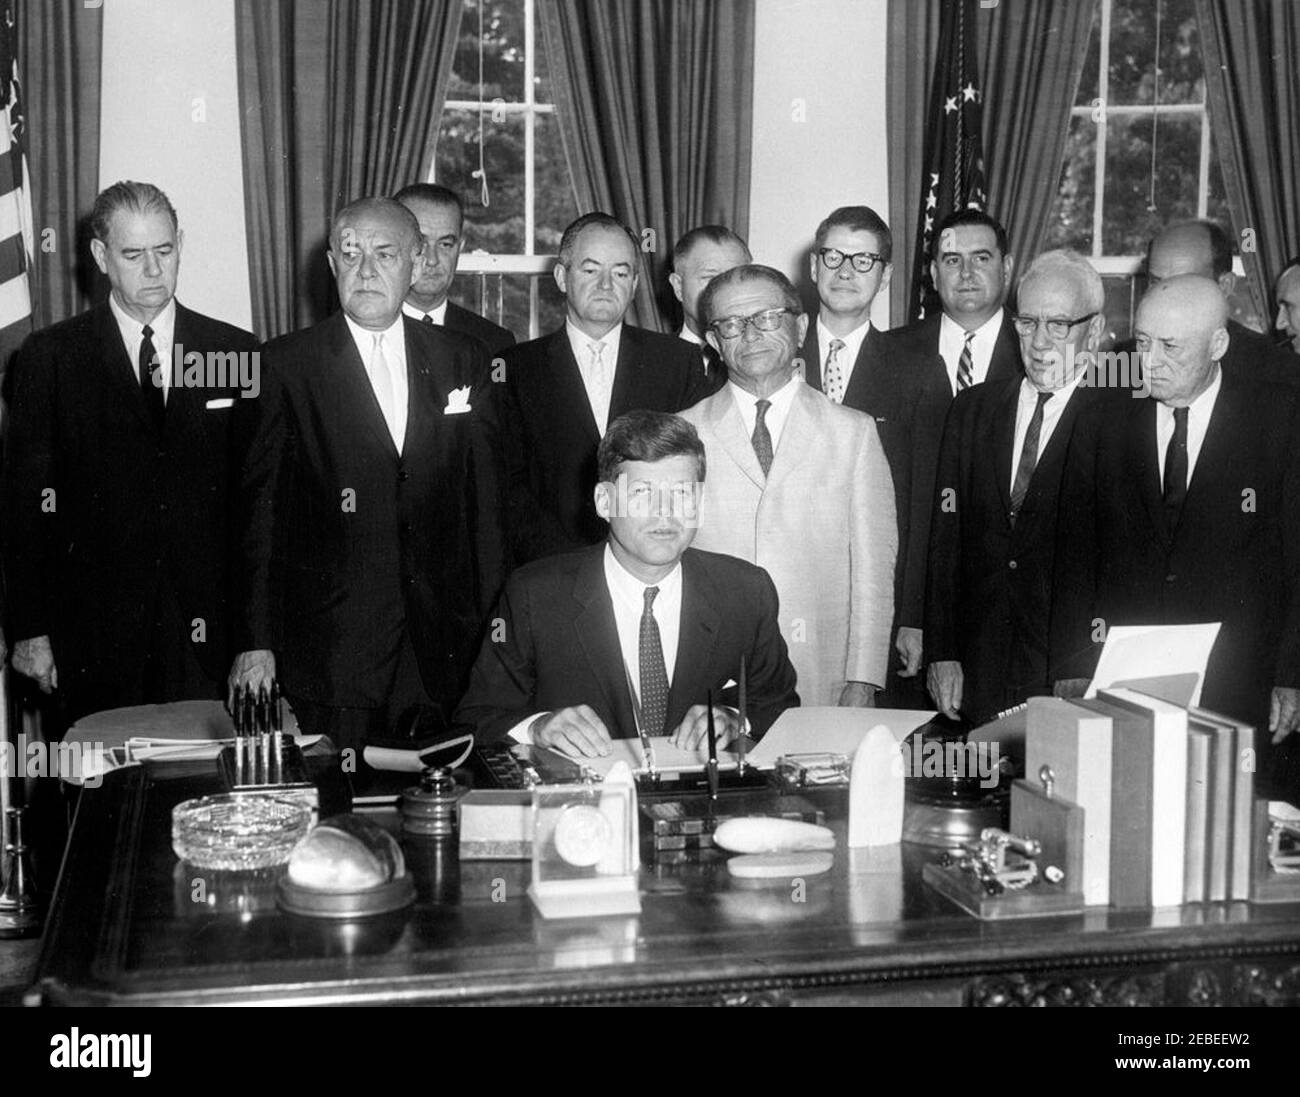 Bill signing, S. 1643 Public Law 87-128, Agricultural Act of 1961, 9:45 AM. President John F. Kennedy speaks during the signing ceremony for S. 1643, the Agricultural Act of 1961. The bill was legislated to improve farm income, expand the market for agricultural products, and reduce stocks of grains and wheat. Standing behind President Kennedy are (L-R): Senator Olin Johnston of South Carolina; Representative Harold D. Cooley of North Carolina; Vice President Lyndon B. Johnson; Senator Hubert Humphrey of Minnesota; Representative W.R. Poage of Texas (mostly hidden); Senator Allen Ellender of L Stock Photo